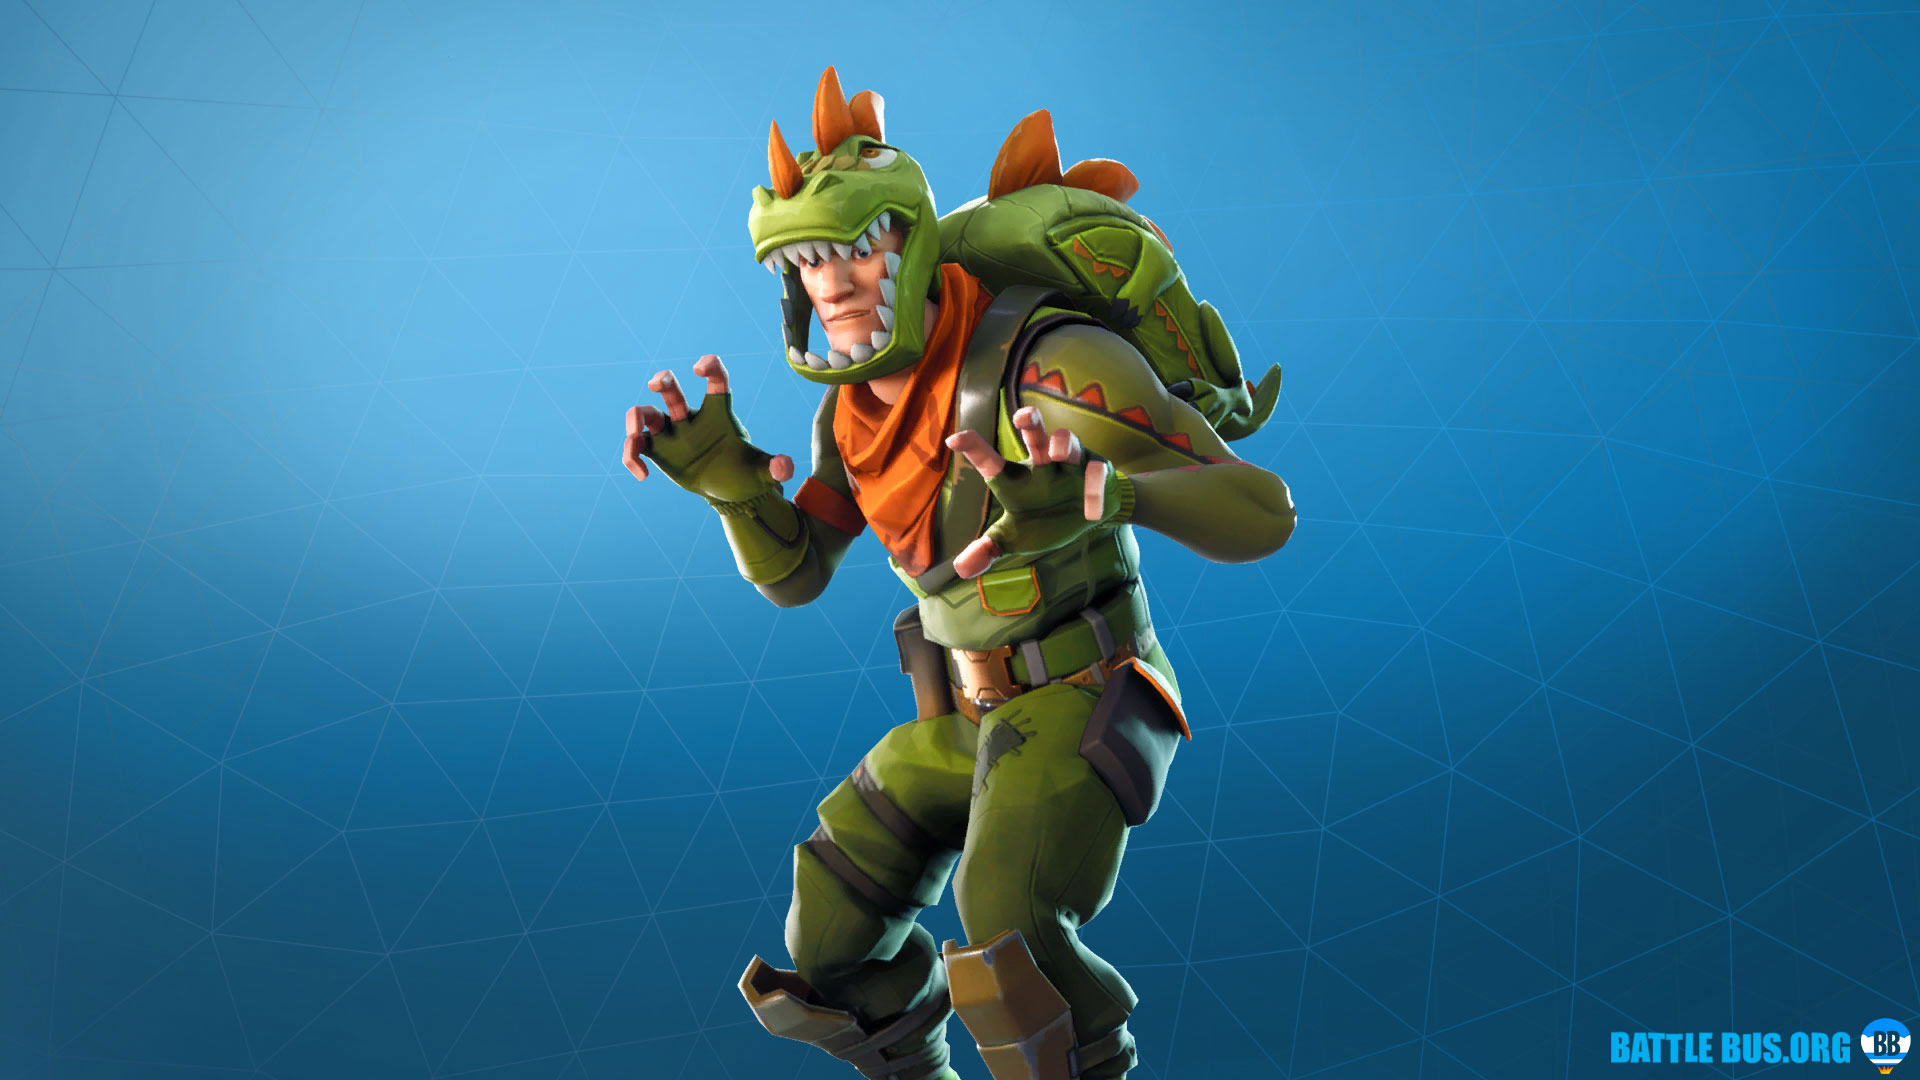 Rex - Outfit - Dino Guard Set - Fortnite News, Skins, Settings, Updates.